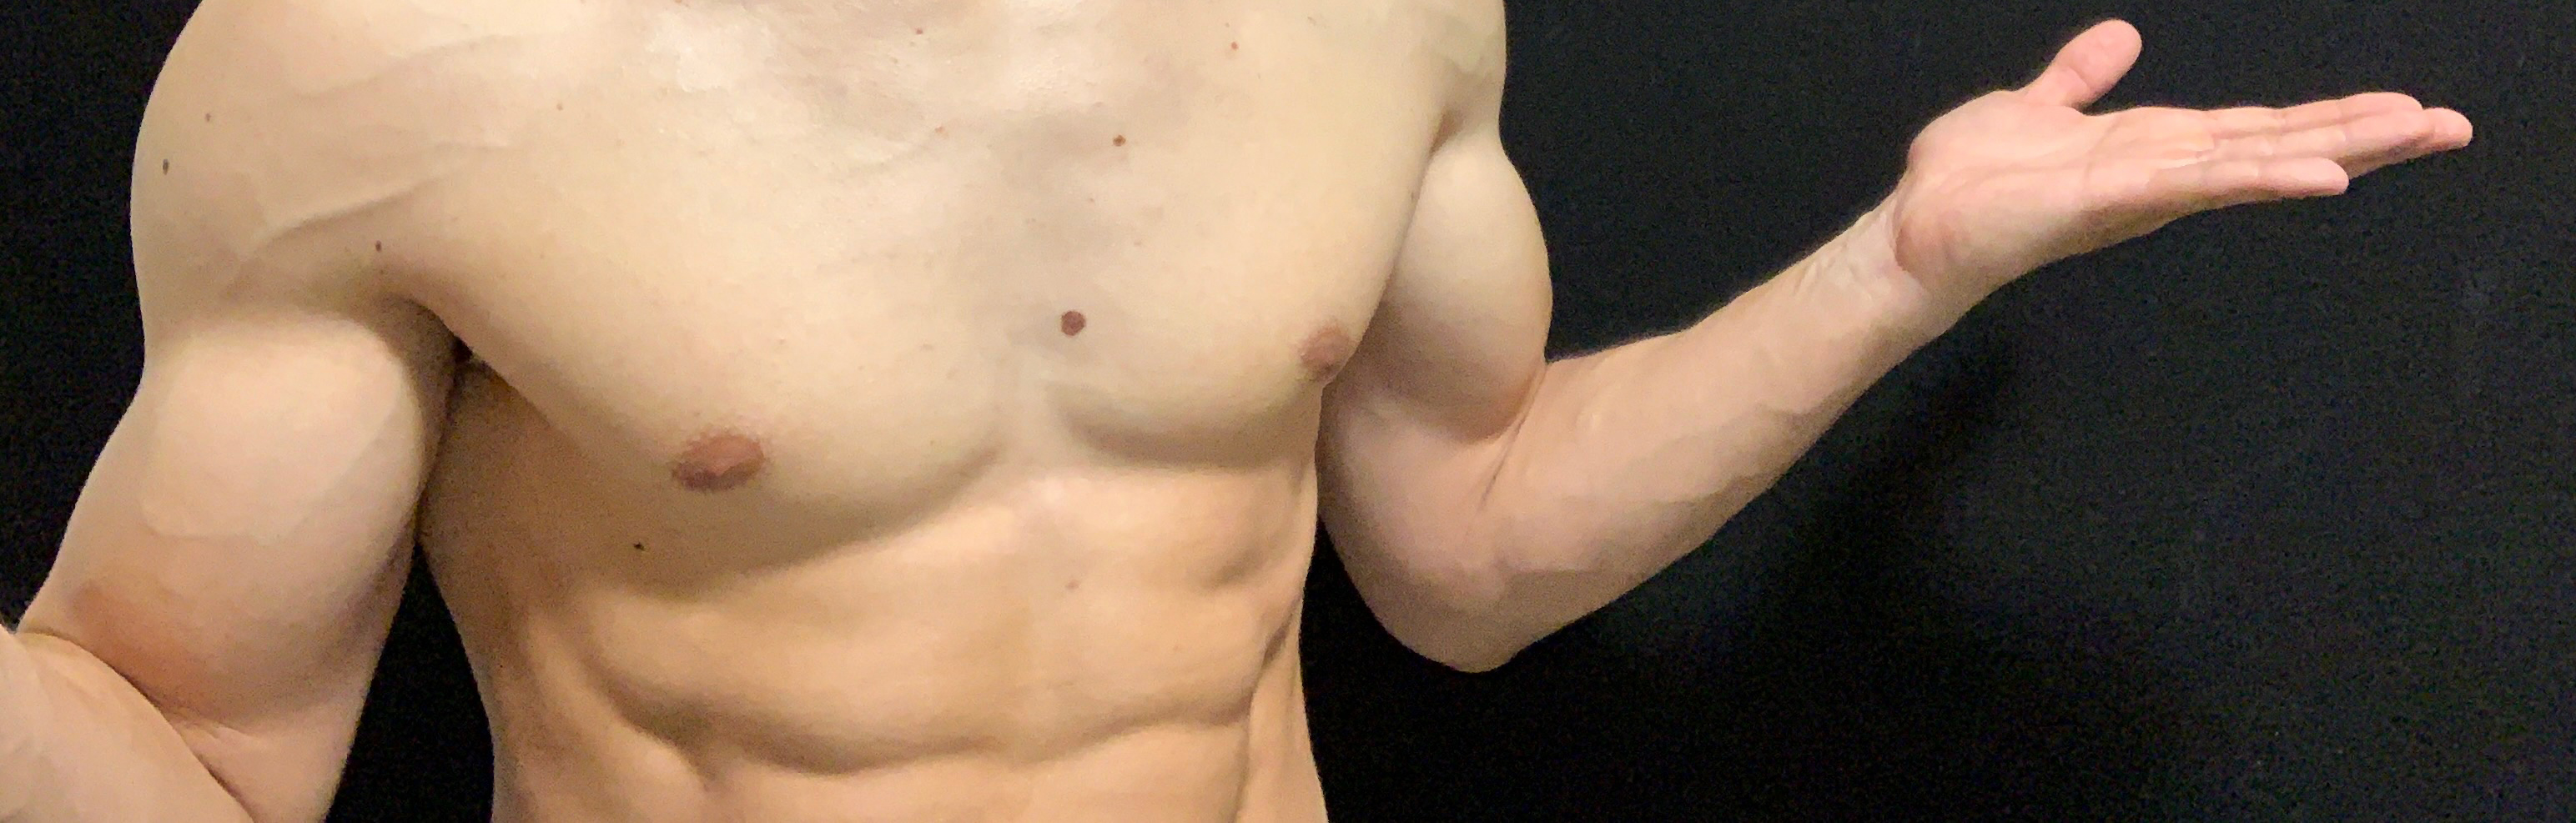 How to keep a six pack after surgery… Round 2 of surgery on a 6 pack!